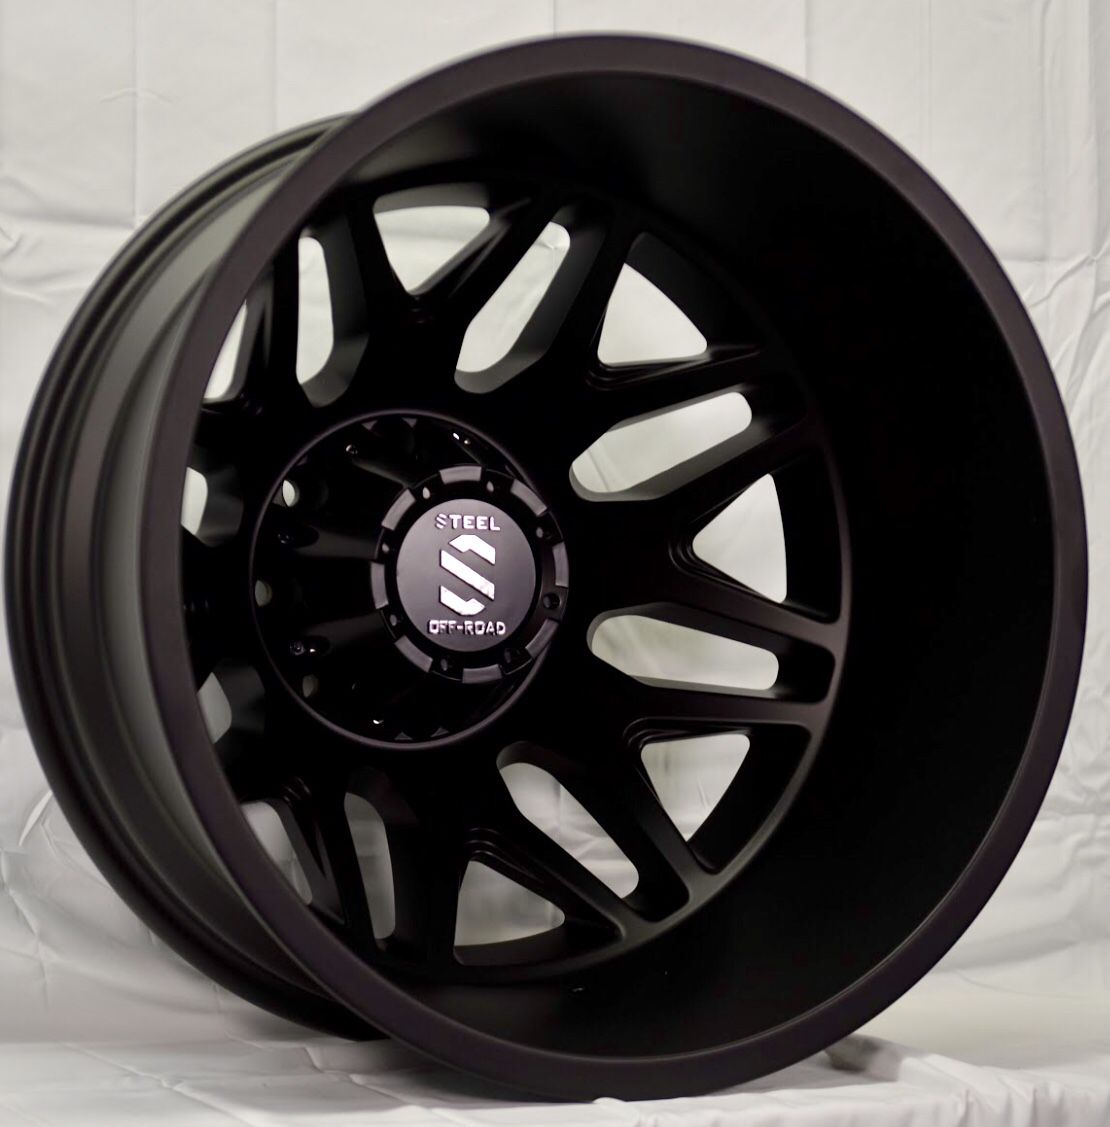 Dually wheels in stock no wait time!!!!